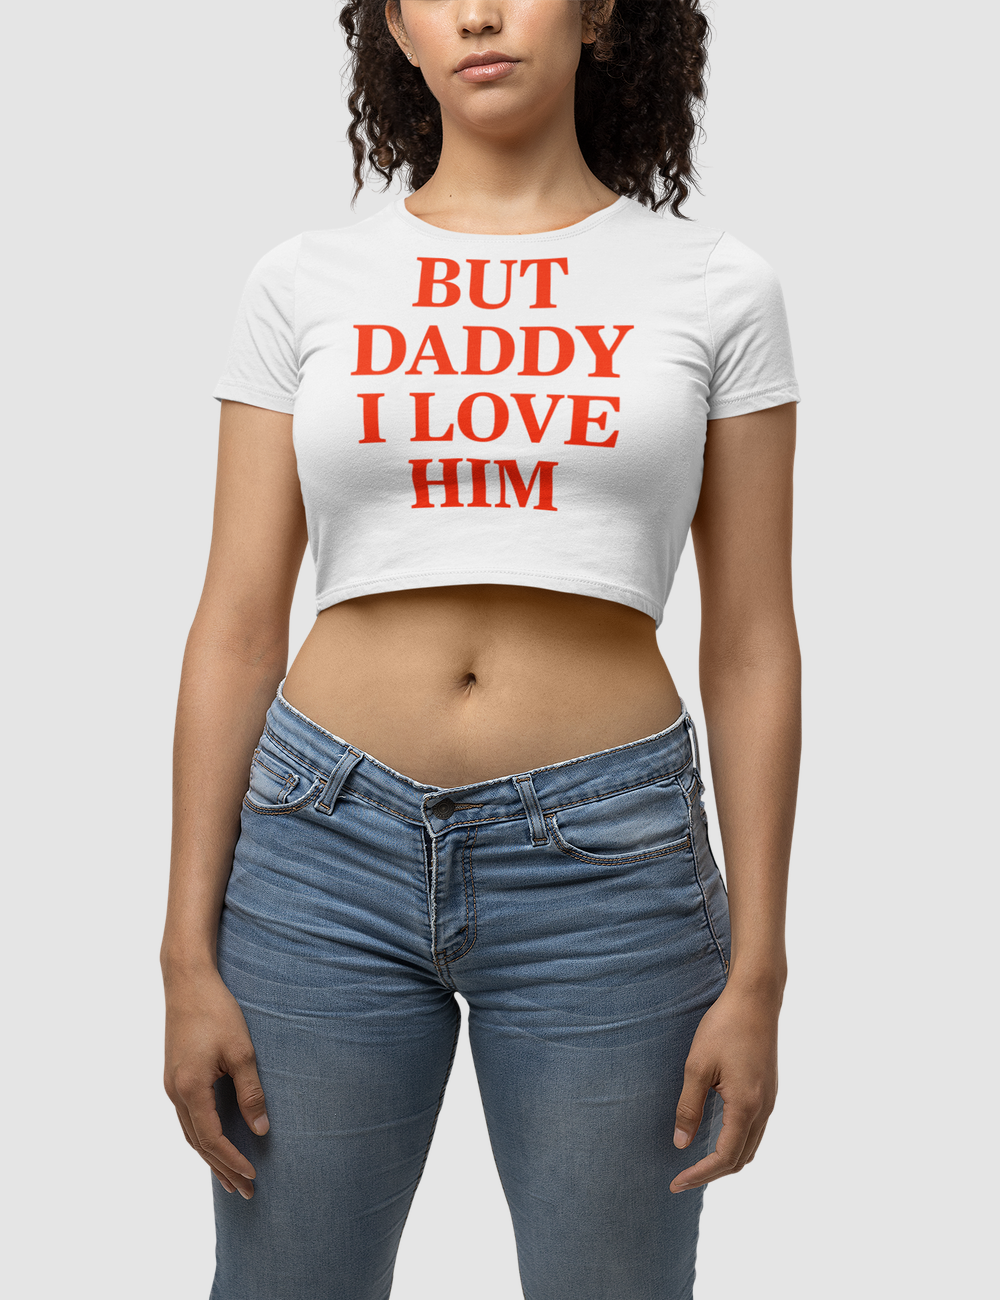 But Daddy I Love Him Women's Fitted Crop Top T-Shirt OniTakai